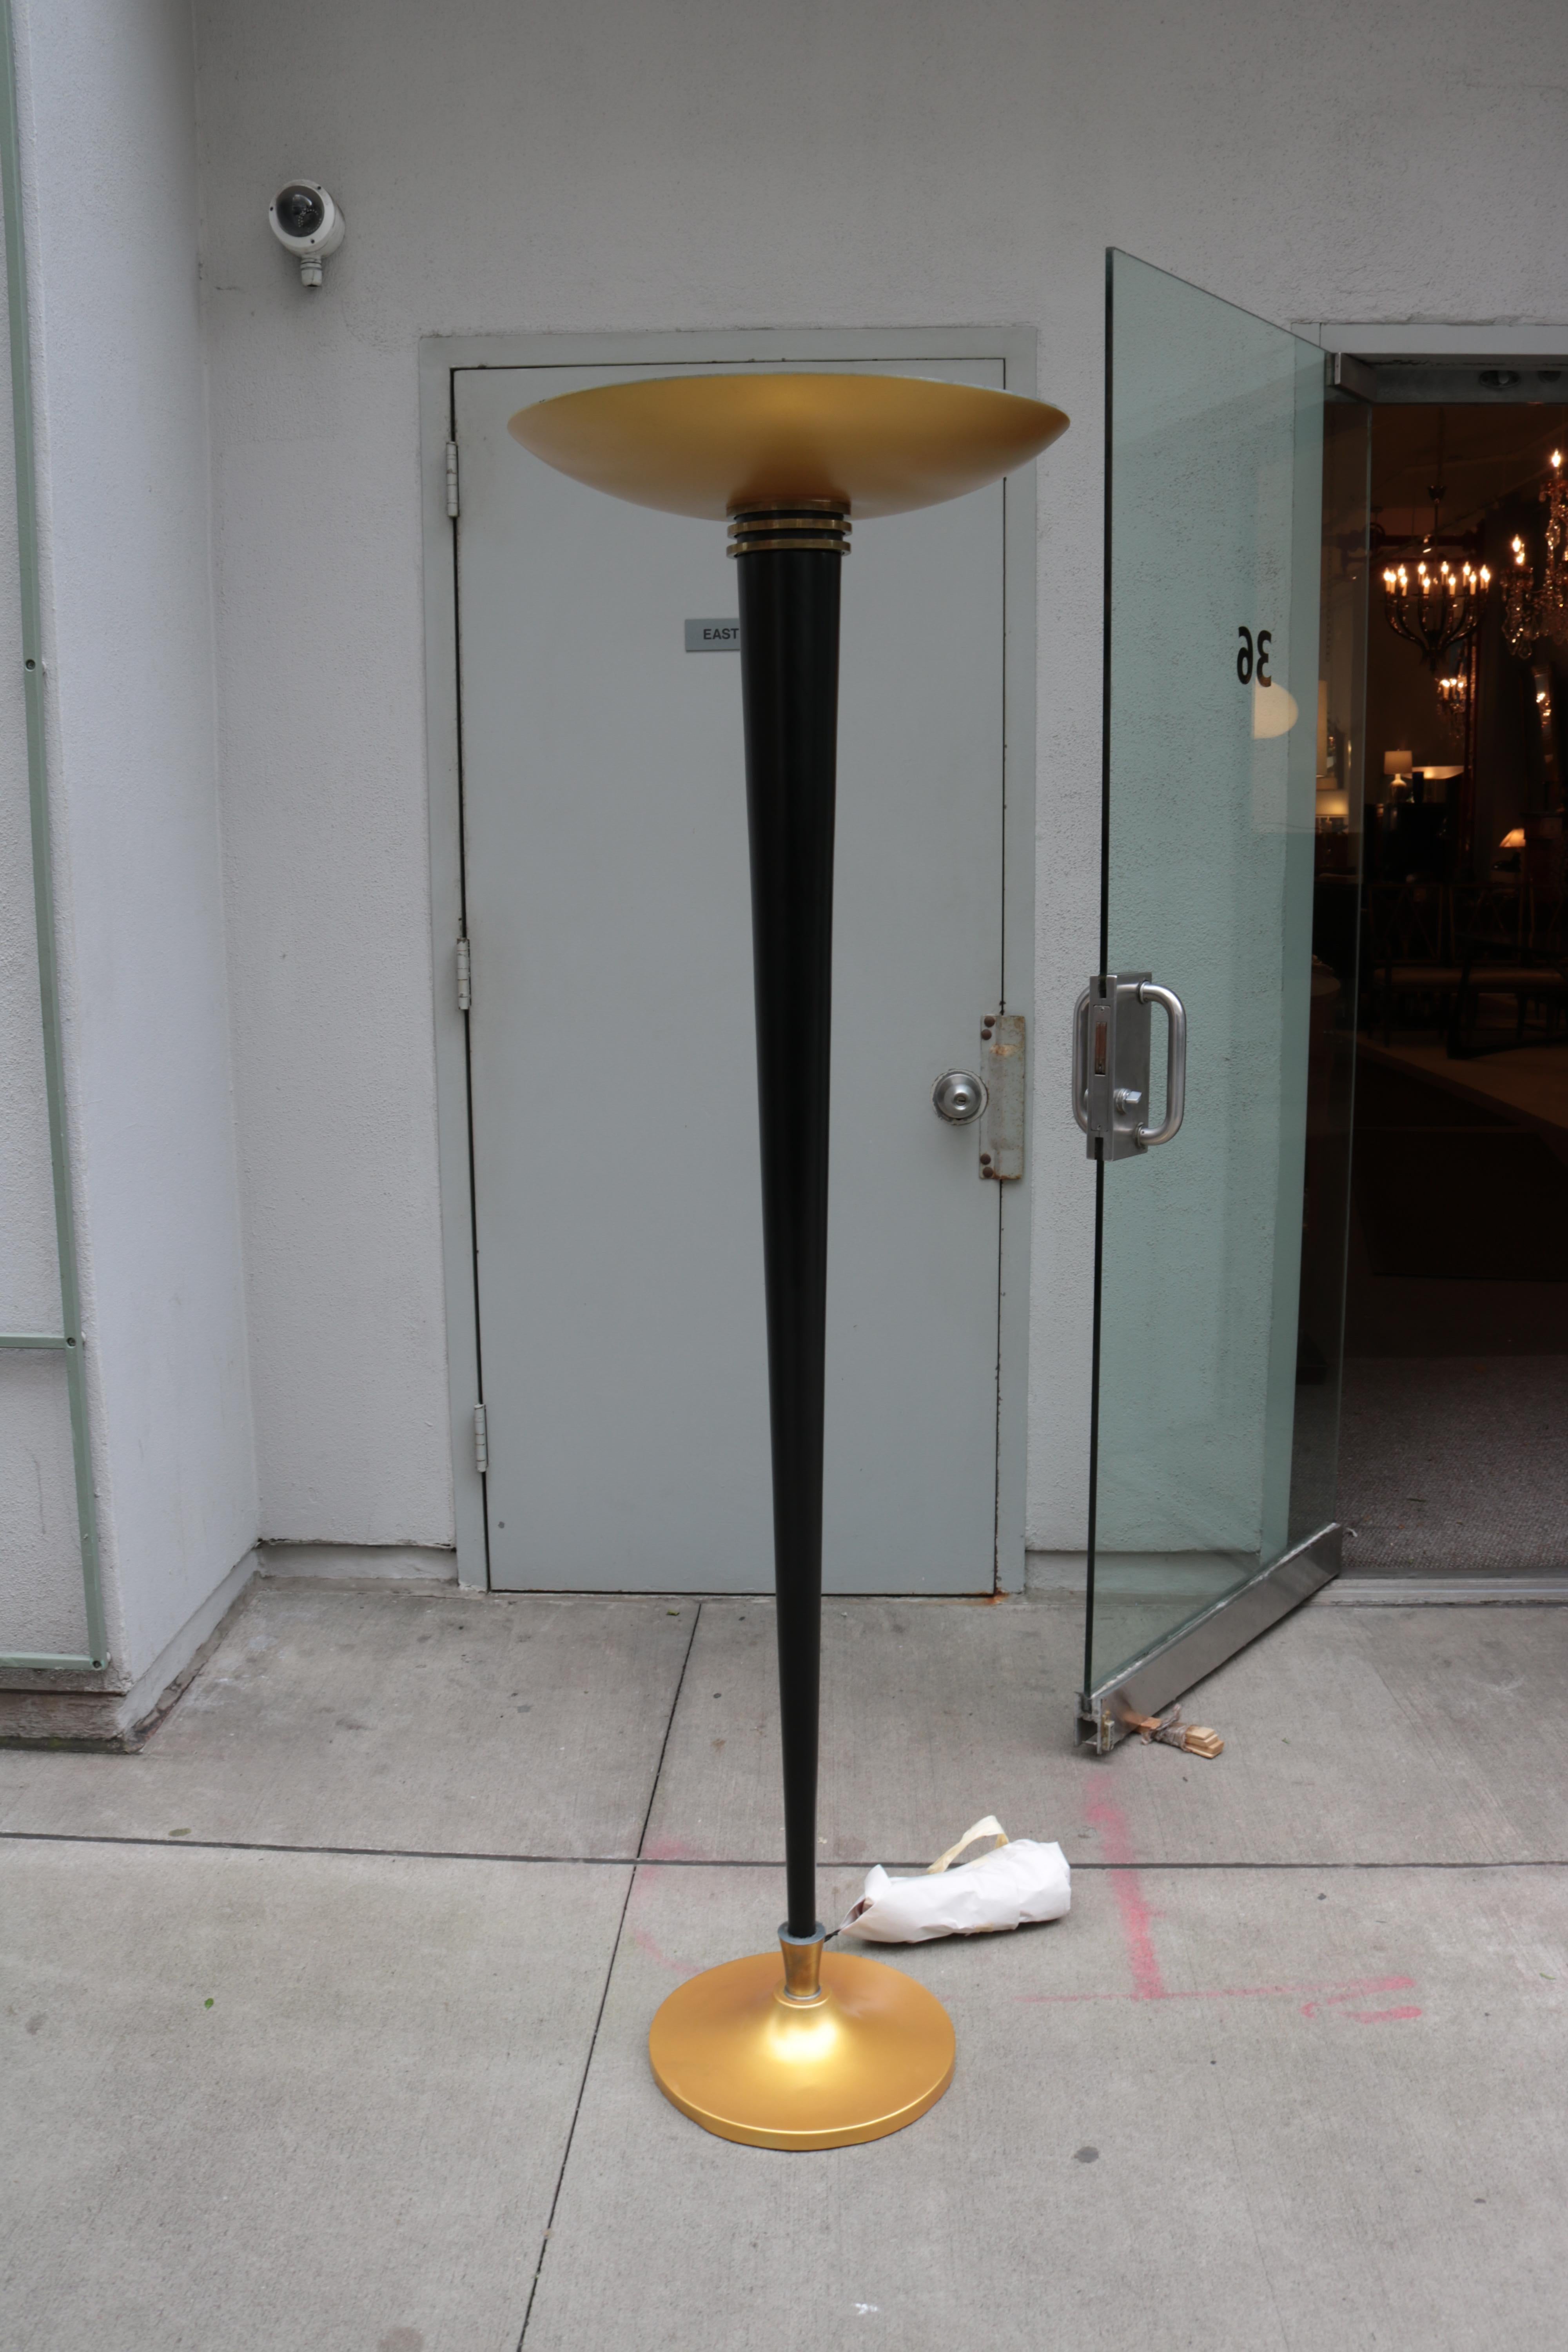 A French Art Deco period torchiere floor lamp from France circa 1930. The conical ebonized shaft stands upon a circular gold painted metal base and supports a shallow gold painted bowl concealing the light source.